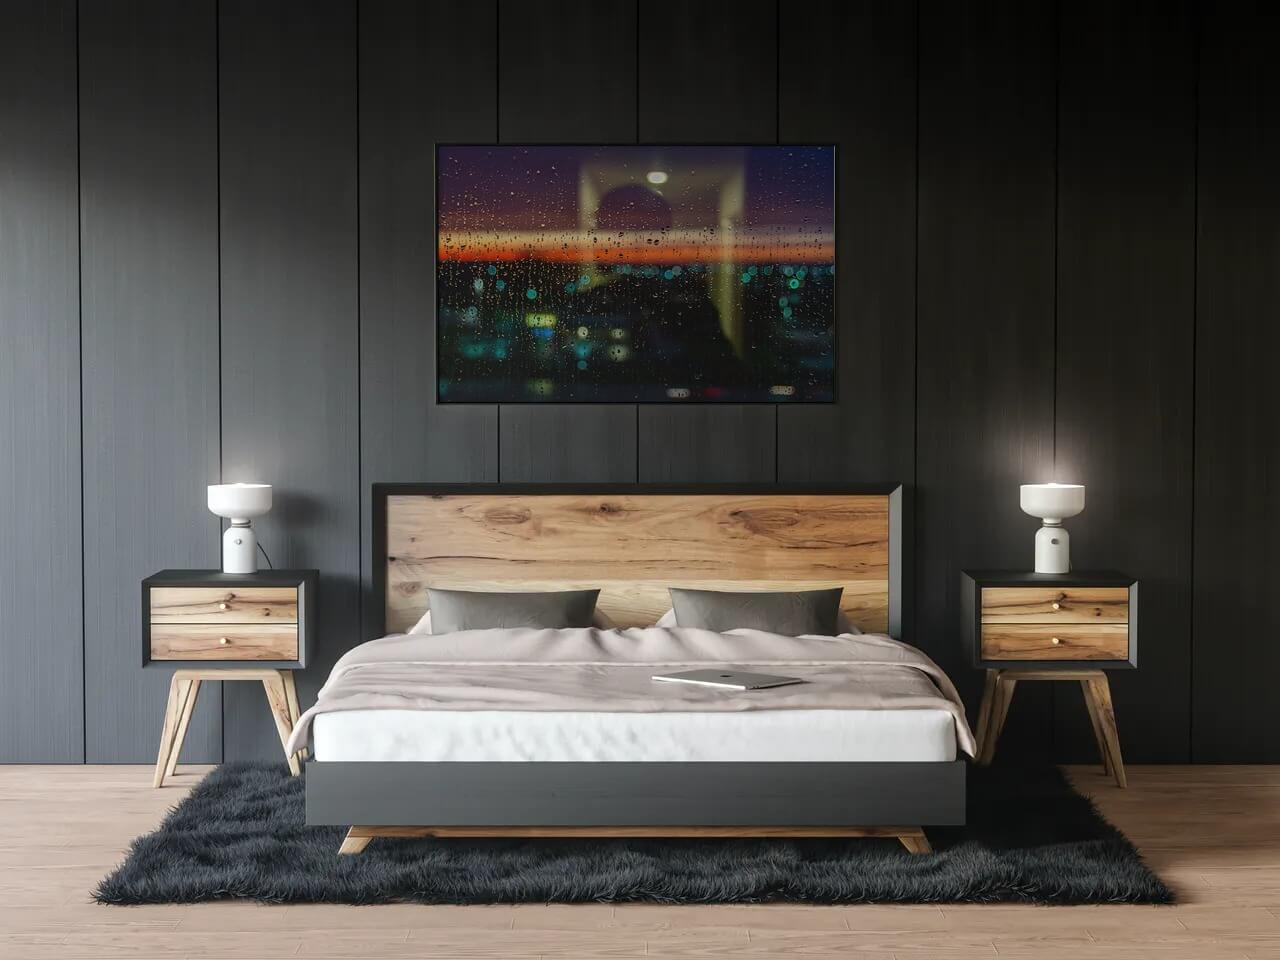  Bedroom wall with city window photography See all products in Contemporary collection 